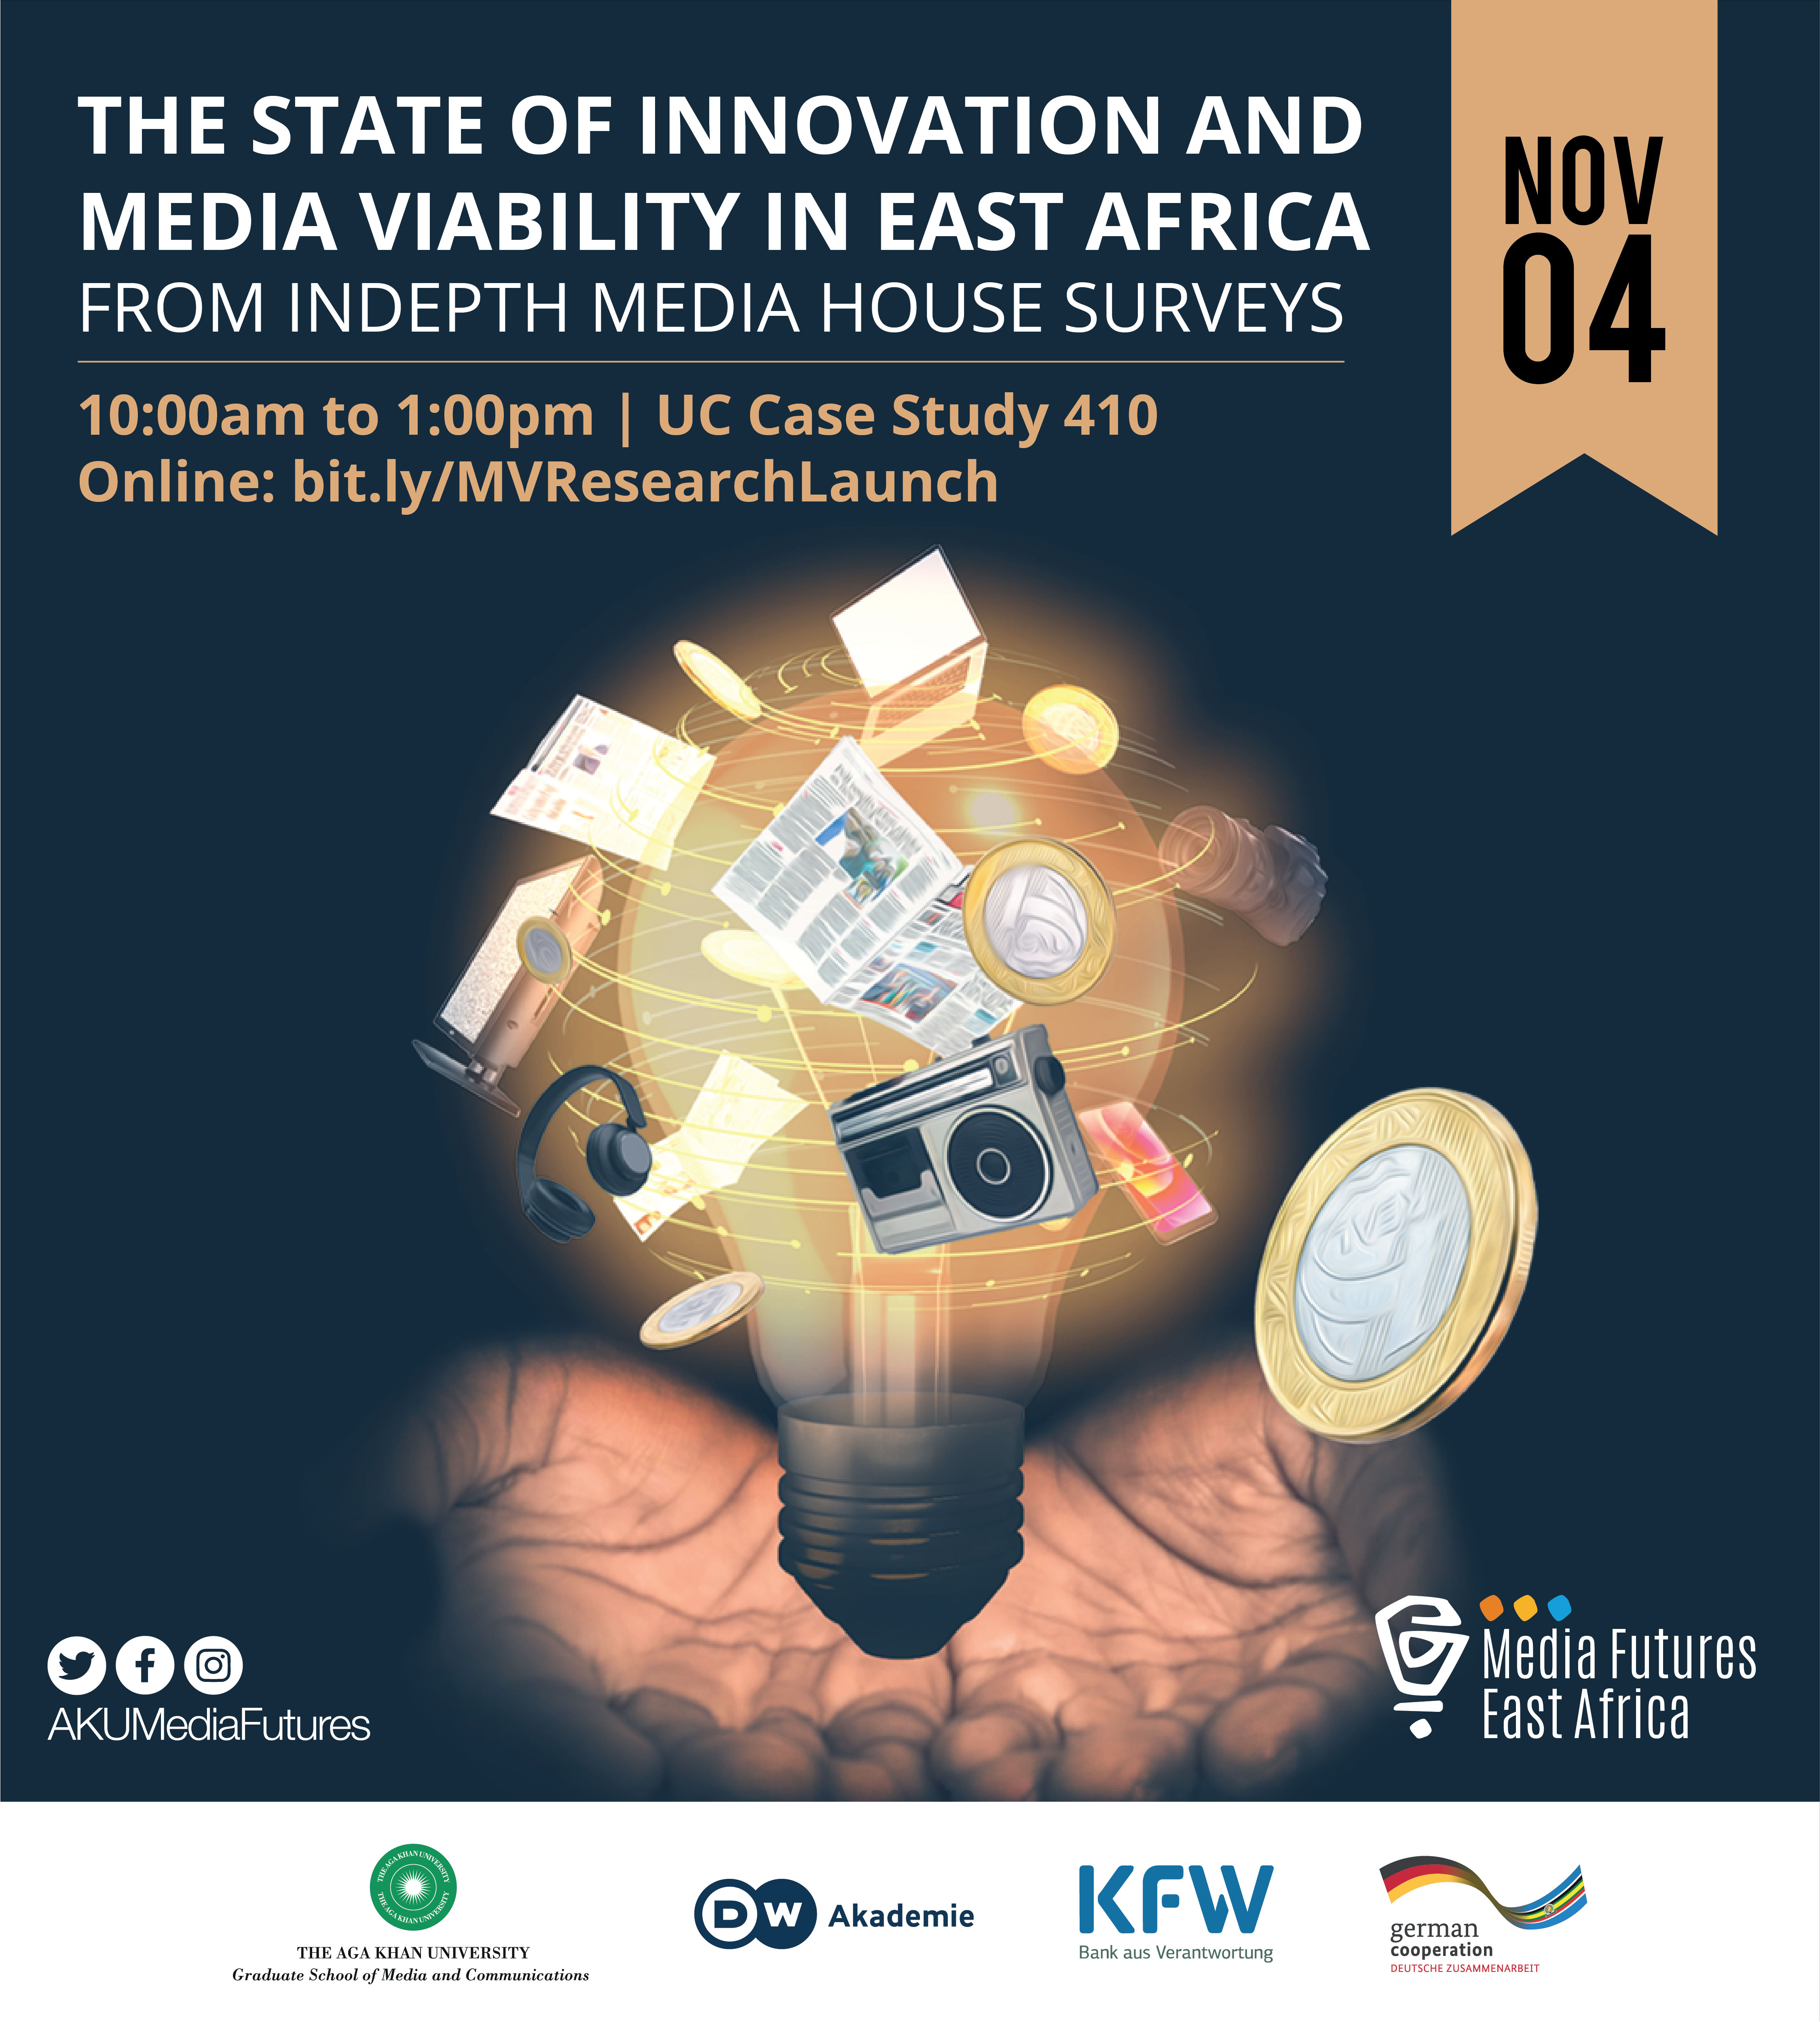  The State Of Innovation And Media Viability In East Africa Report